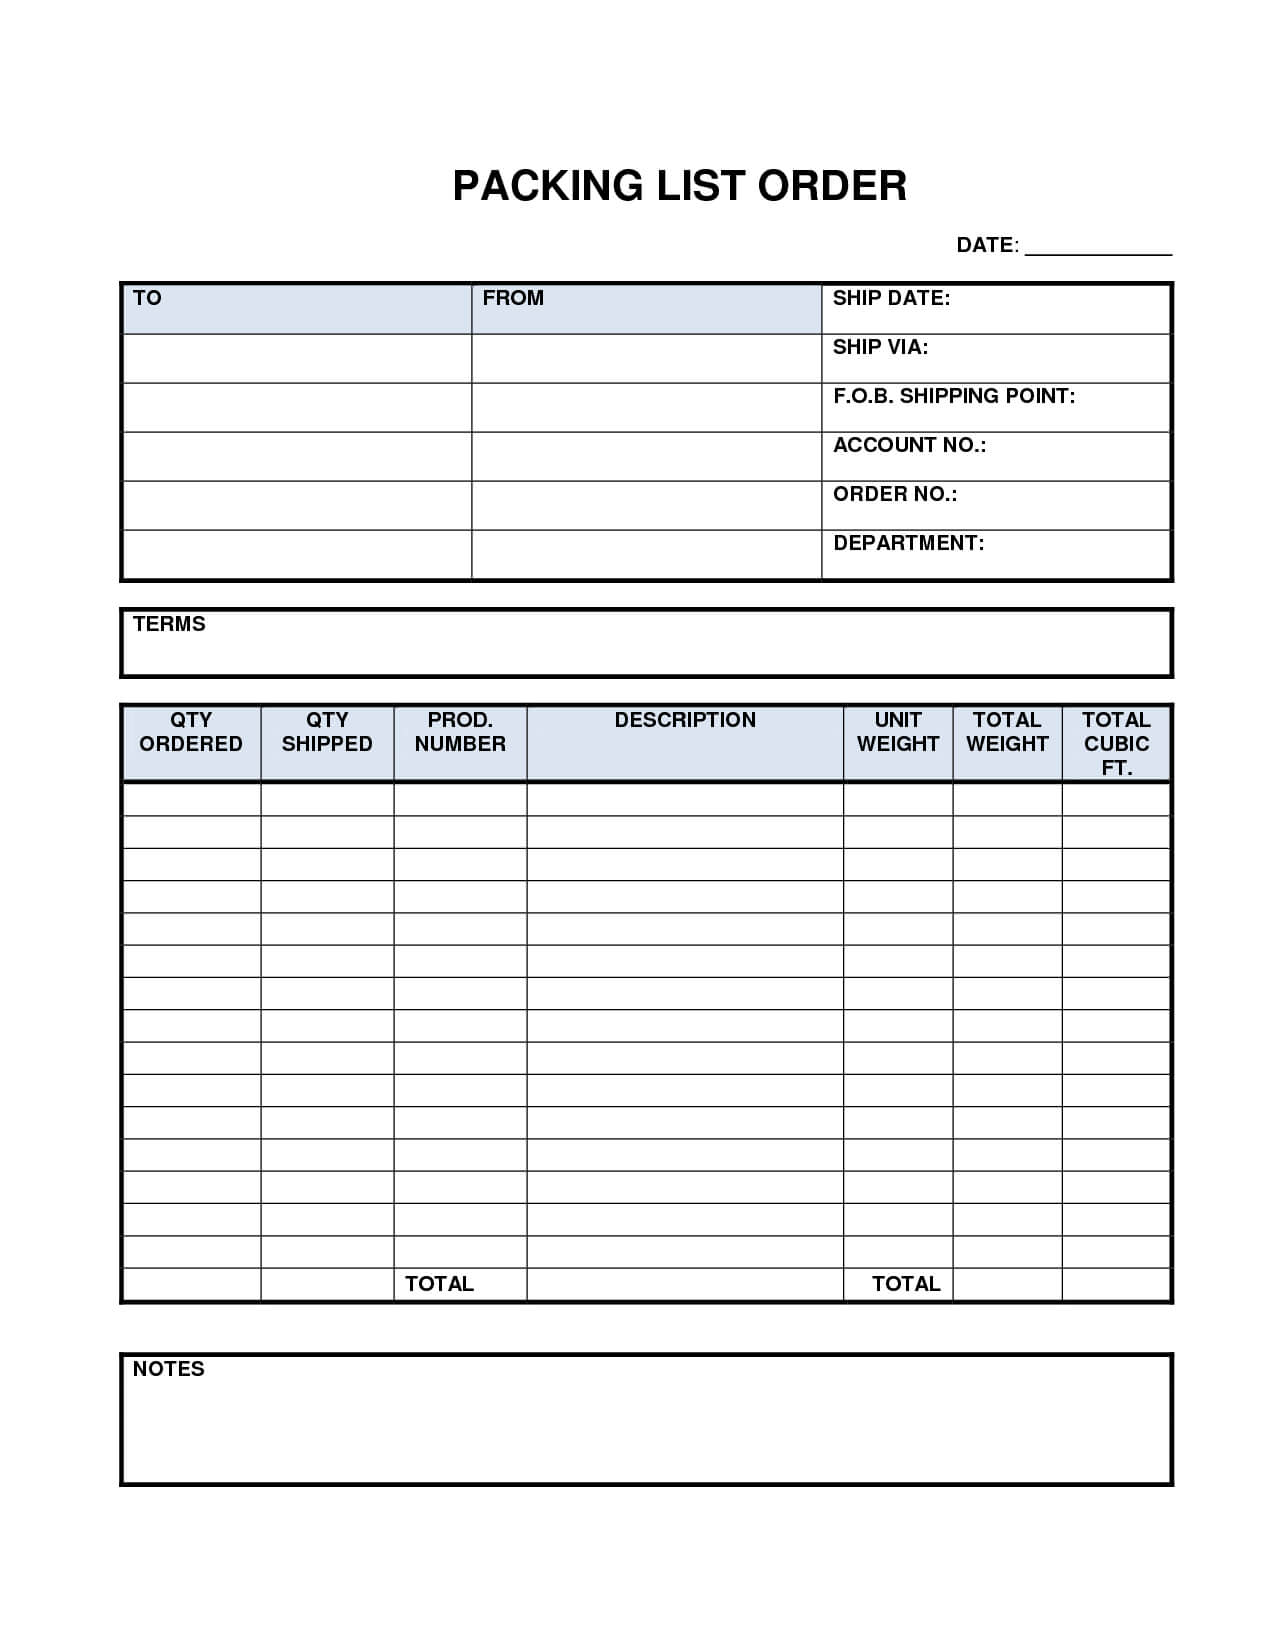 Blank Packing List Template ] - Packing List Free Printable Intended For Blank Packing List Template